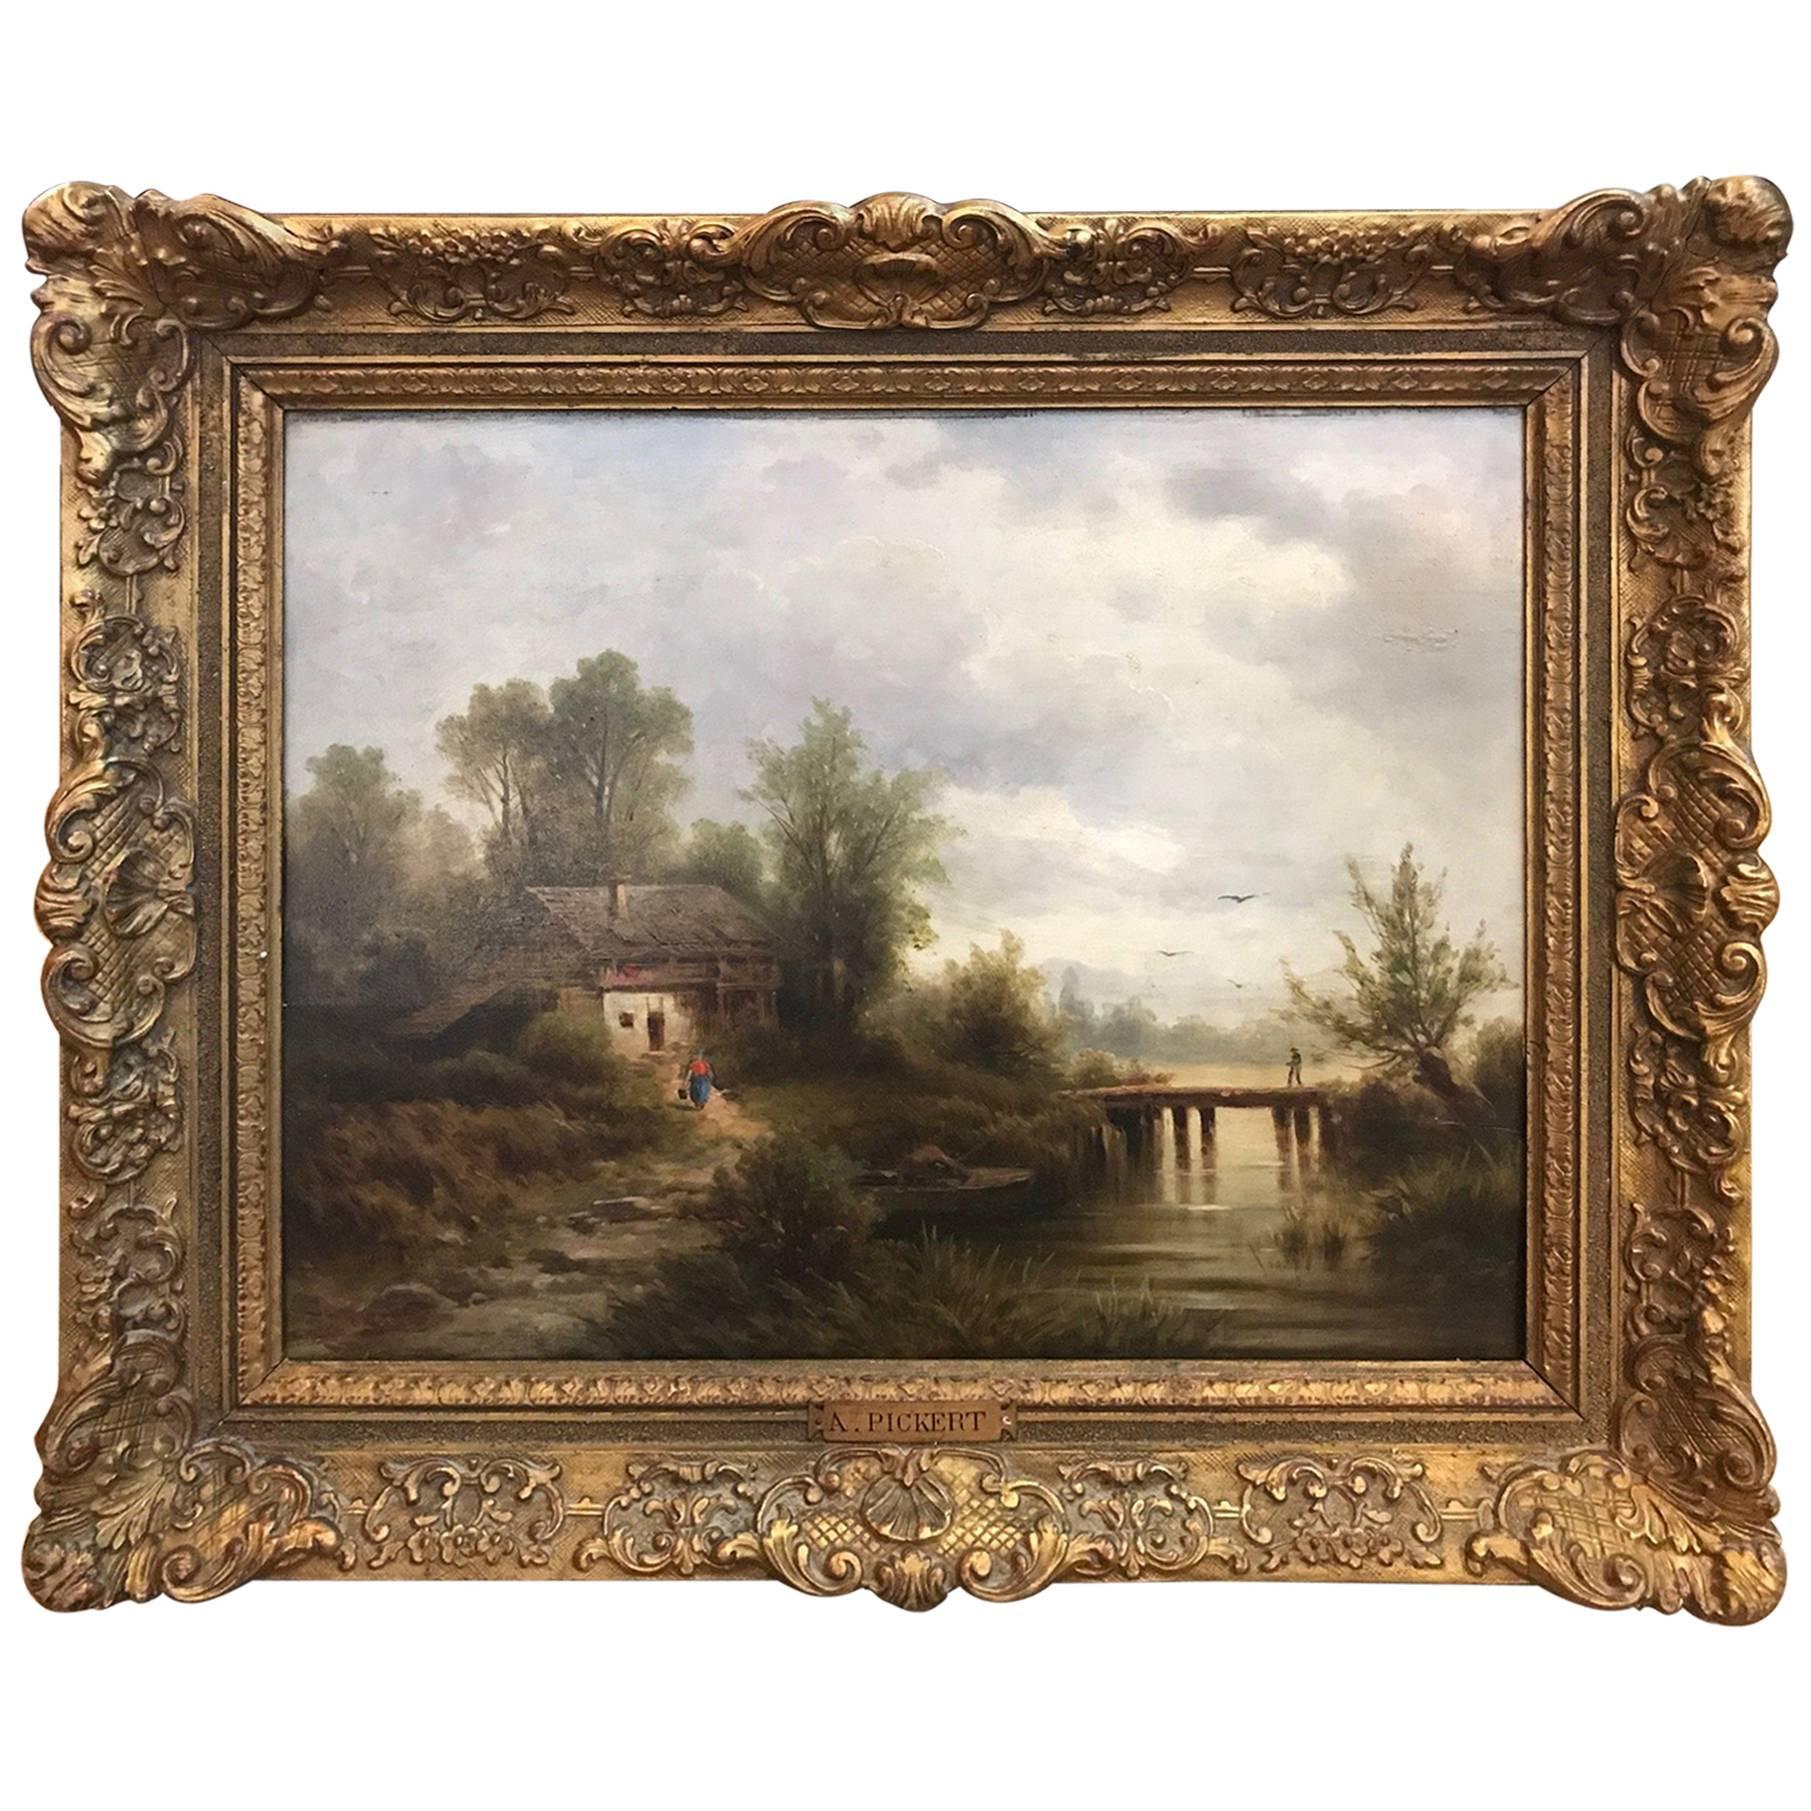 Antique Landscape Oil Painting on Board in Giltwood Frame, Signed by the Artist